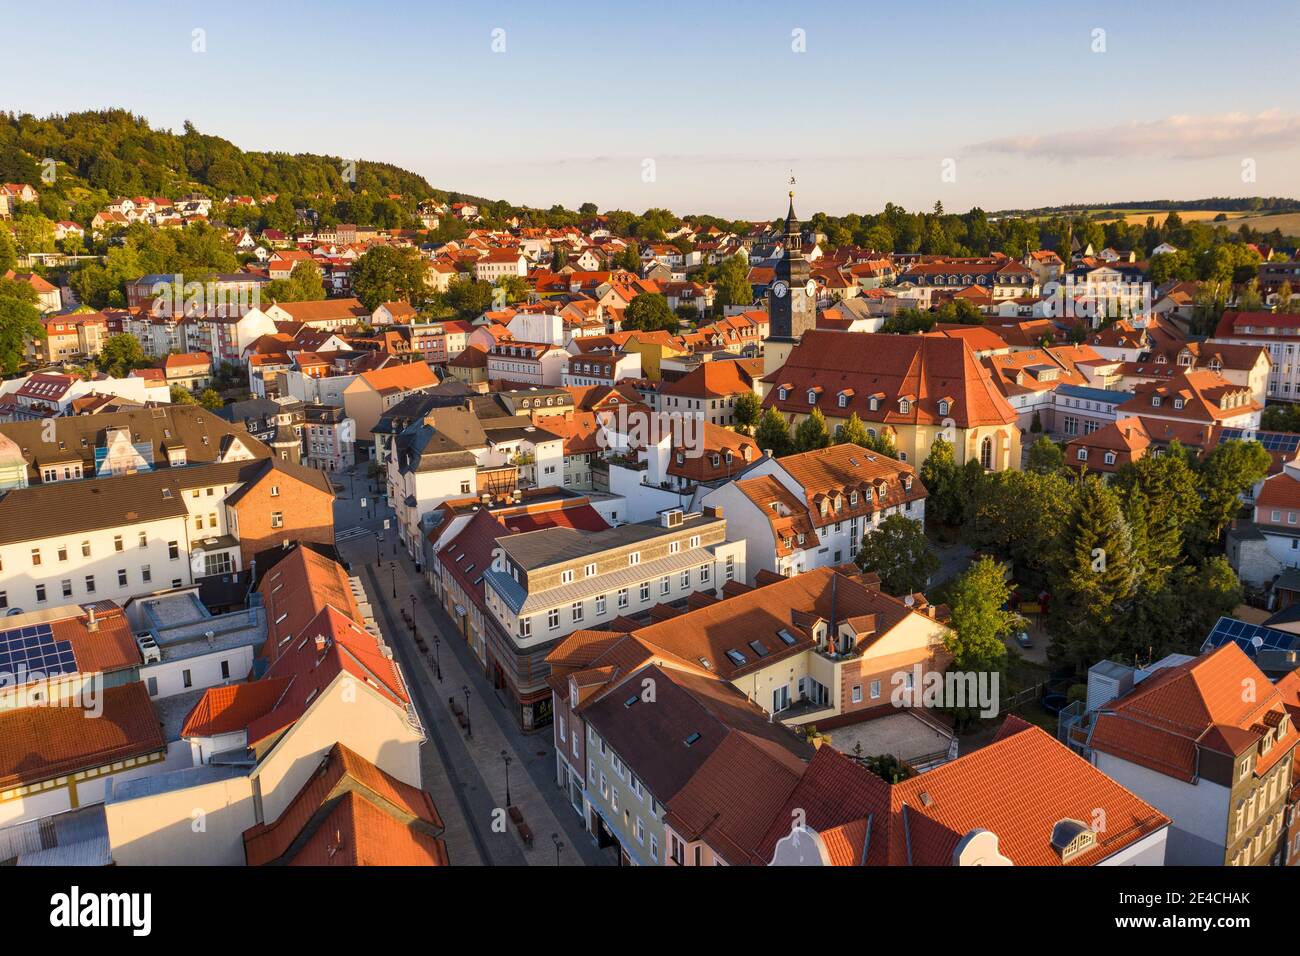 Germany, Thuringia, Ilmenau, town, houses, church, overview, oblique view, aerial view Stock Photo